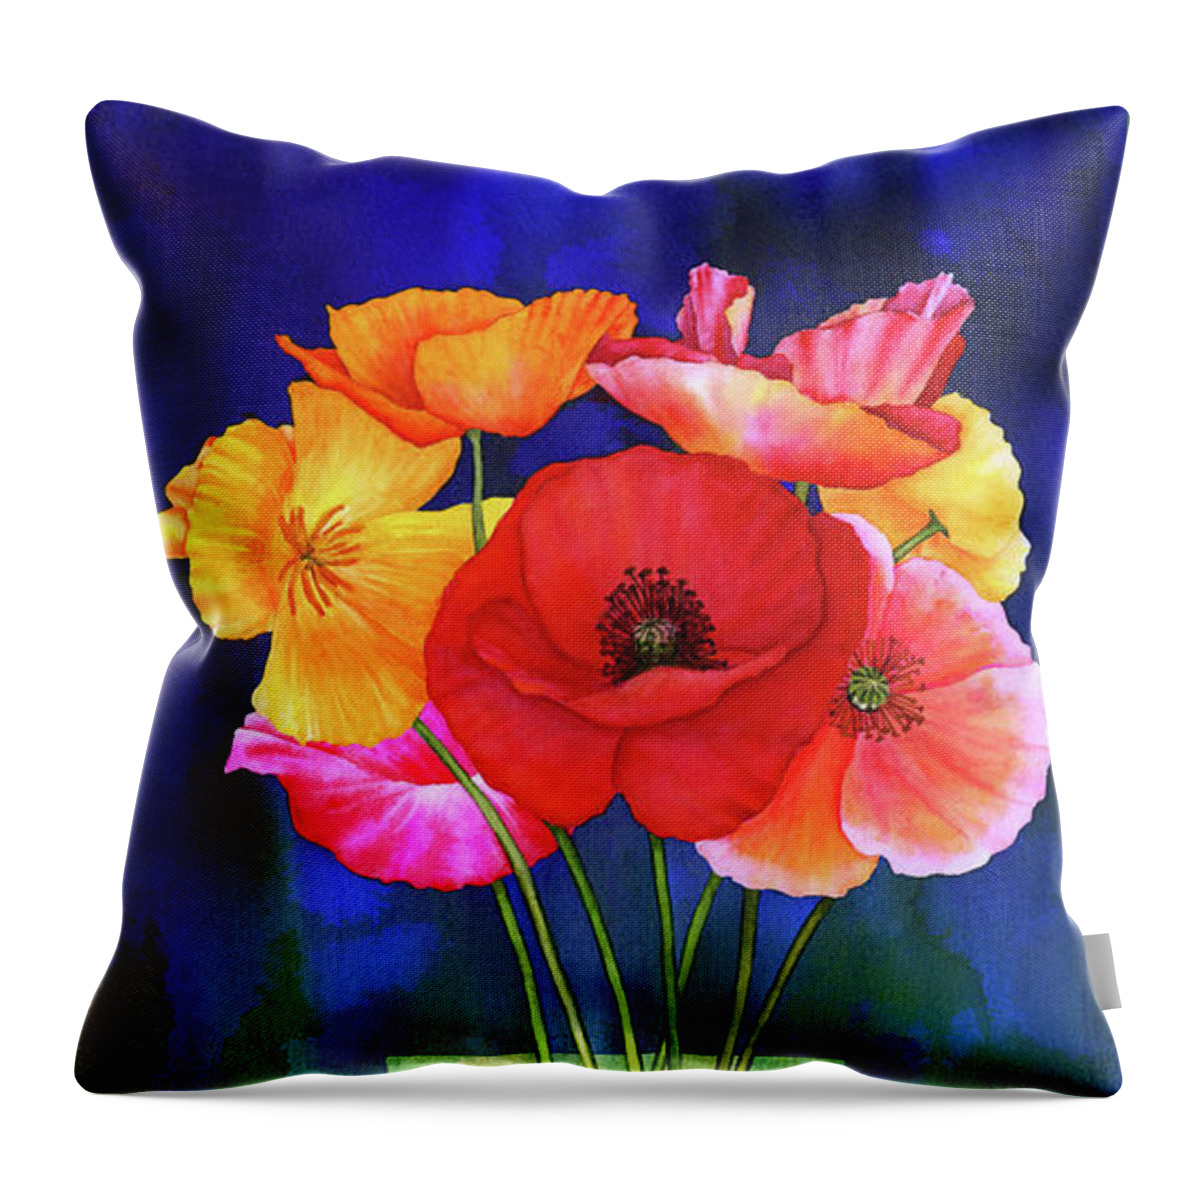 Poppy Throw Pillow featuring the painting Poppies in Vase by Hailey E Herrera